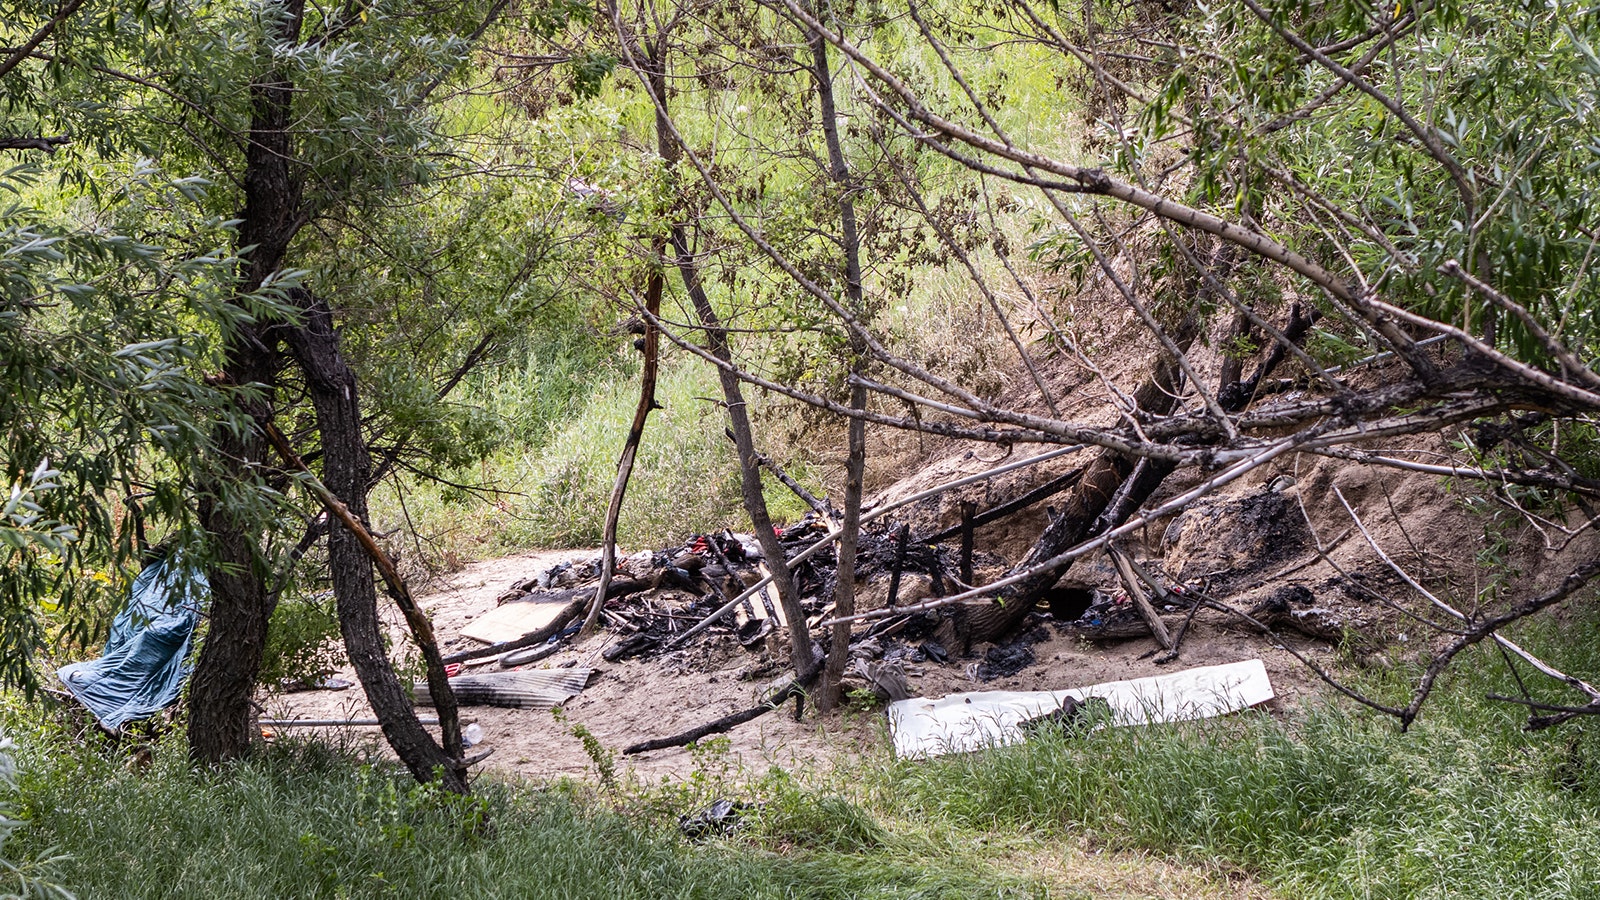 A burned out homeless camp along Crow Creek near the Trail's End area in Cheyenne.